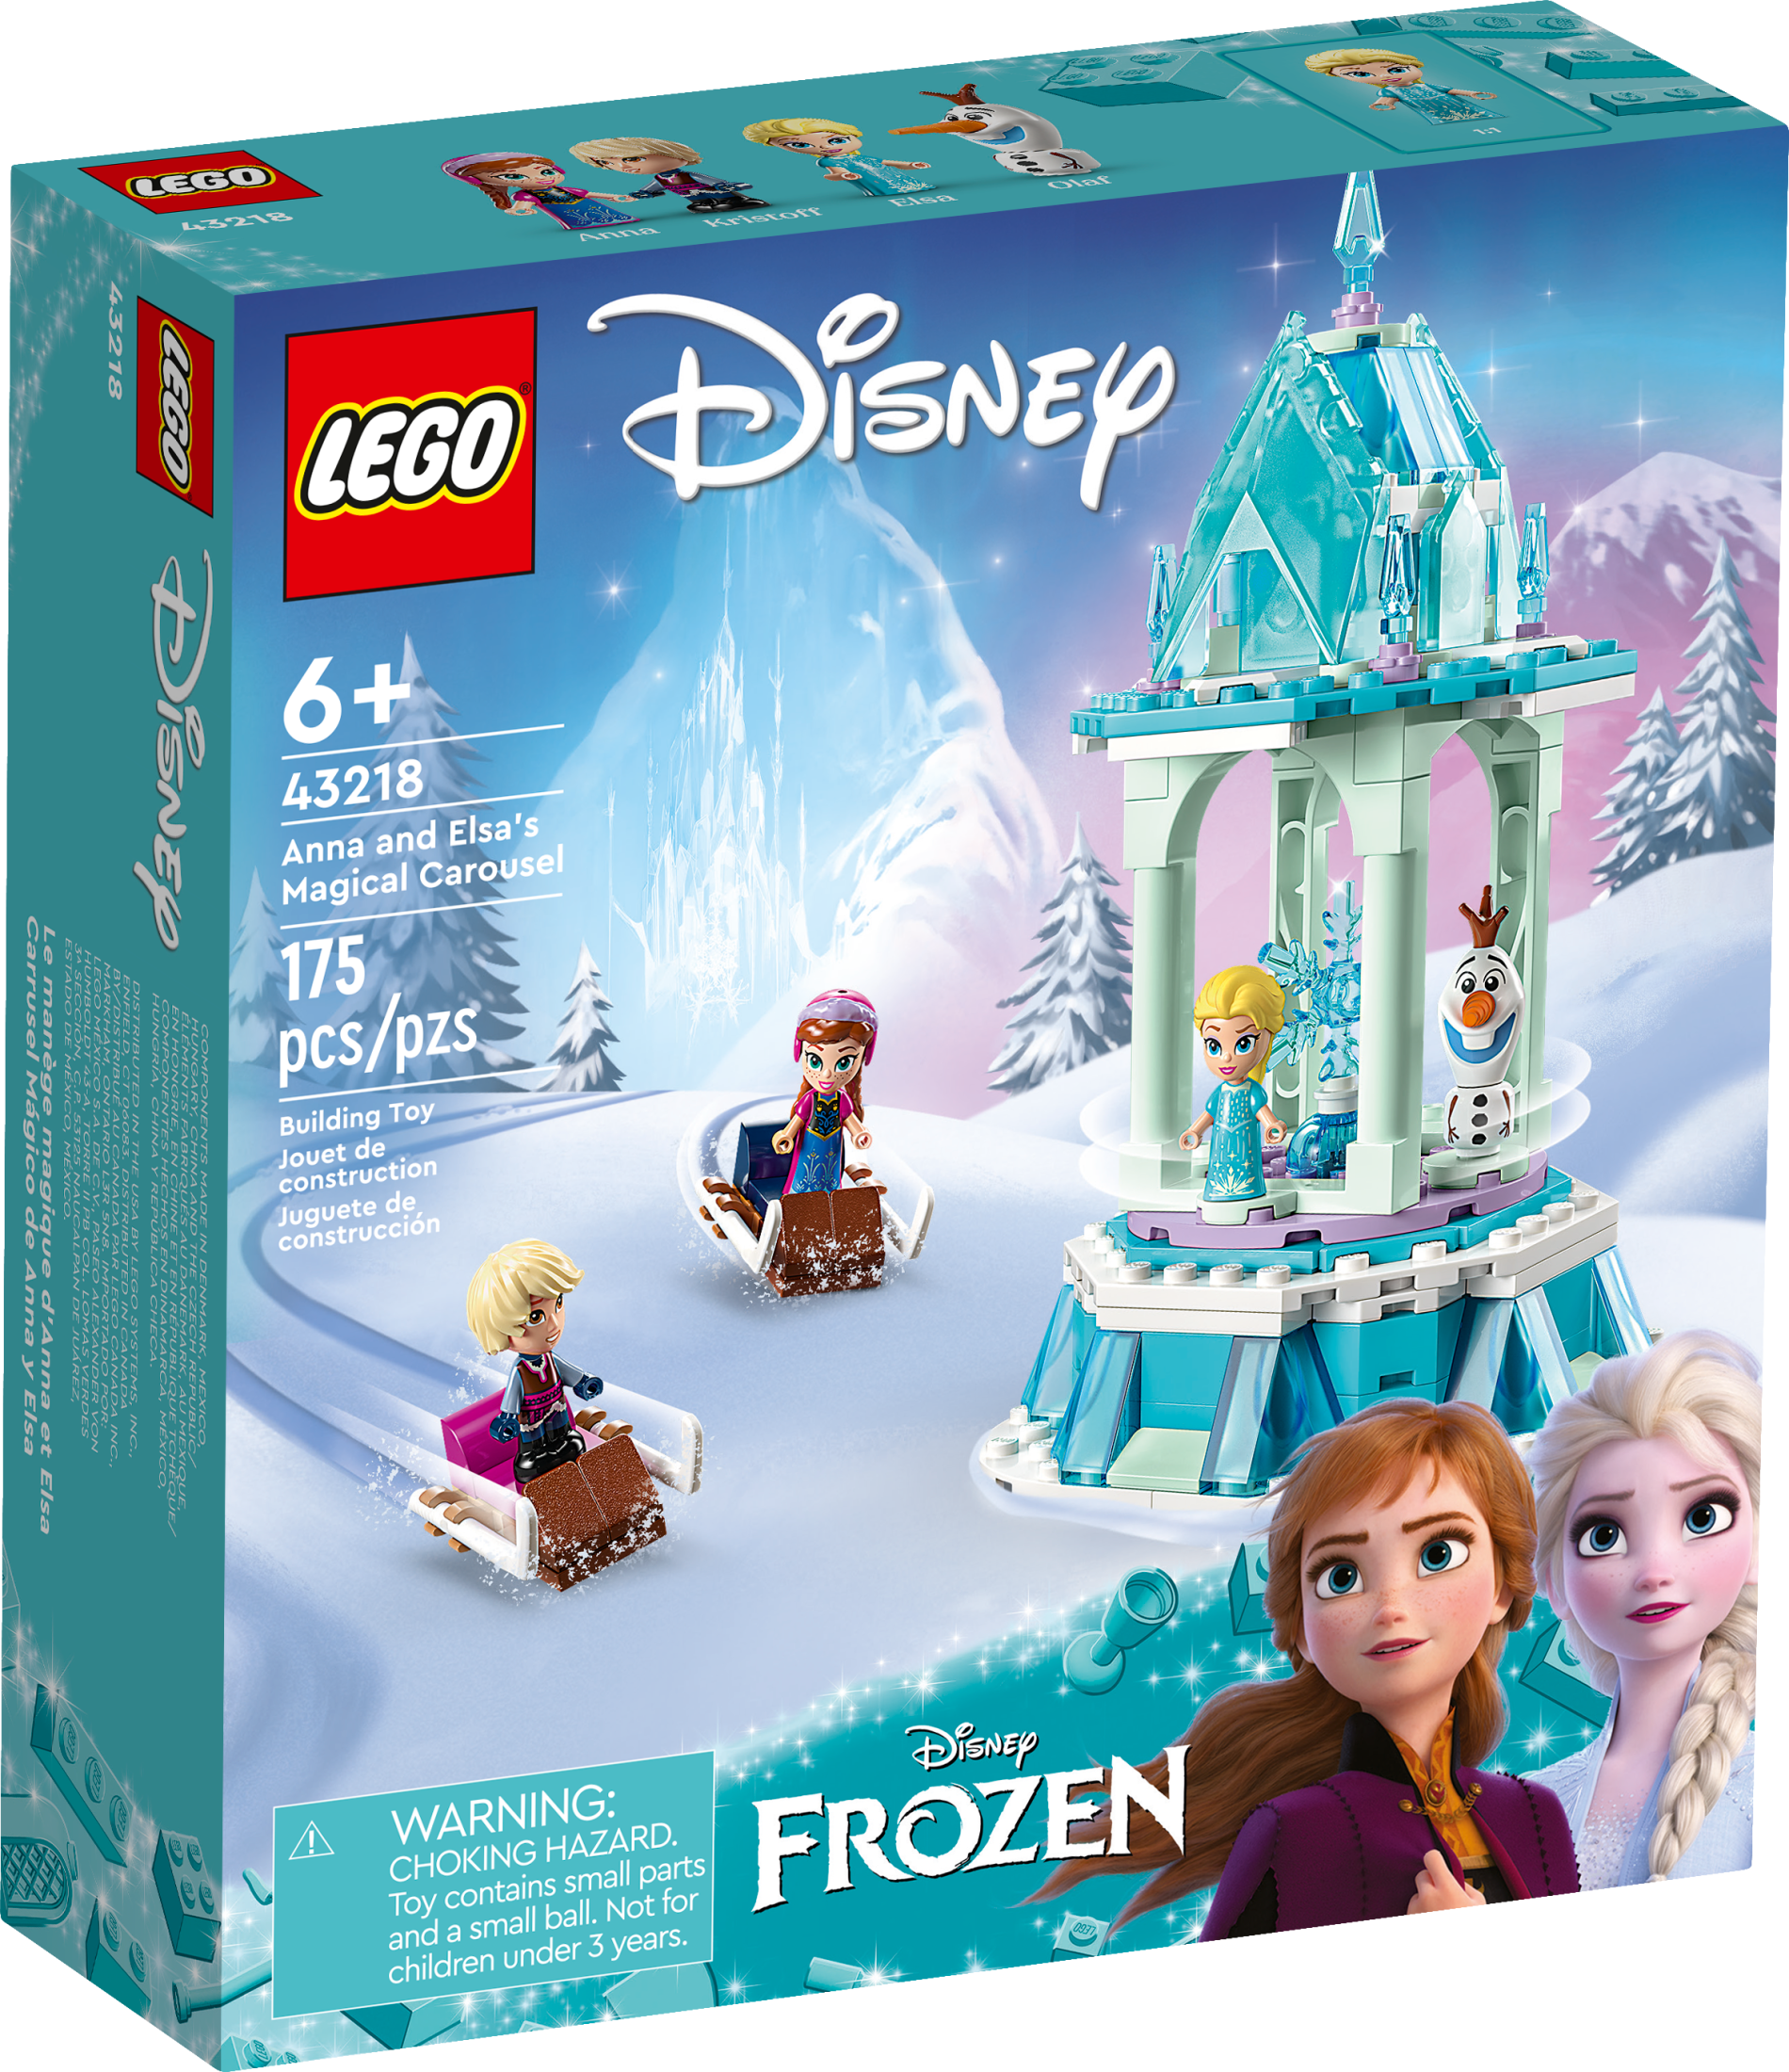 LEGO Disney Frozen Anna and Elsa’s Magical Carousel 43218 Ice Palace Building Toy Set with Disney Princess Elsa, Anna and Olaf, Great Birthday Gift for 6 Year Olds - image 3 of 8